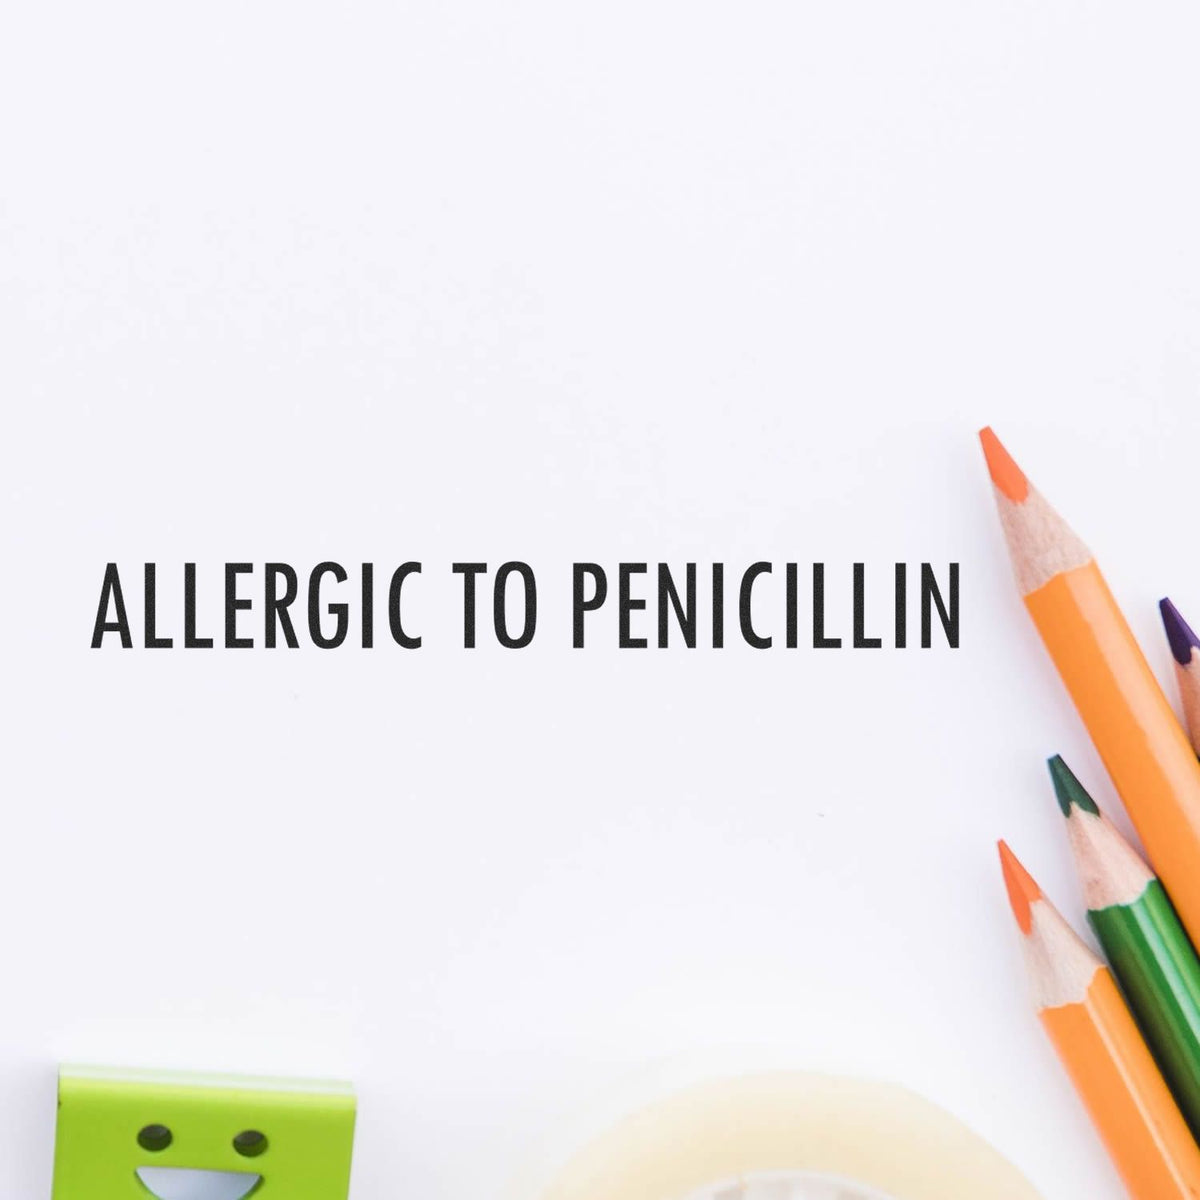 Large Allergic To Penicillin Rubber Stamp Lifestyle Photo